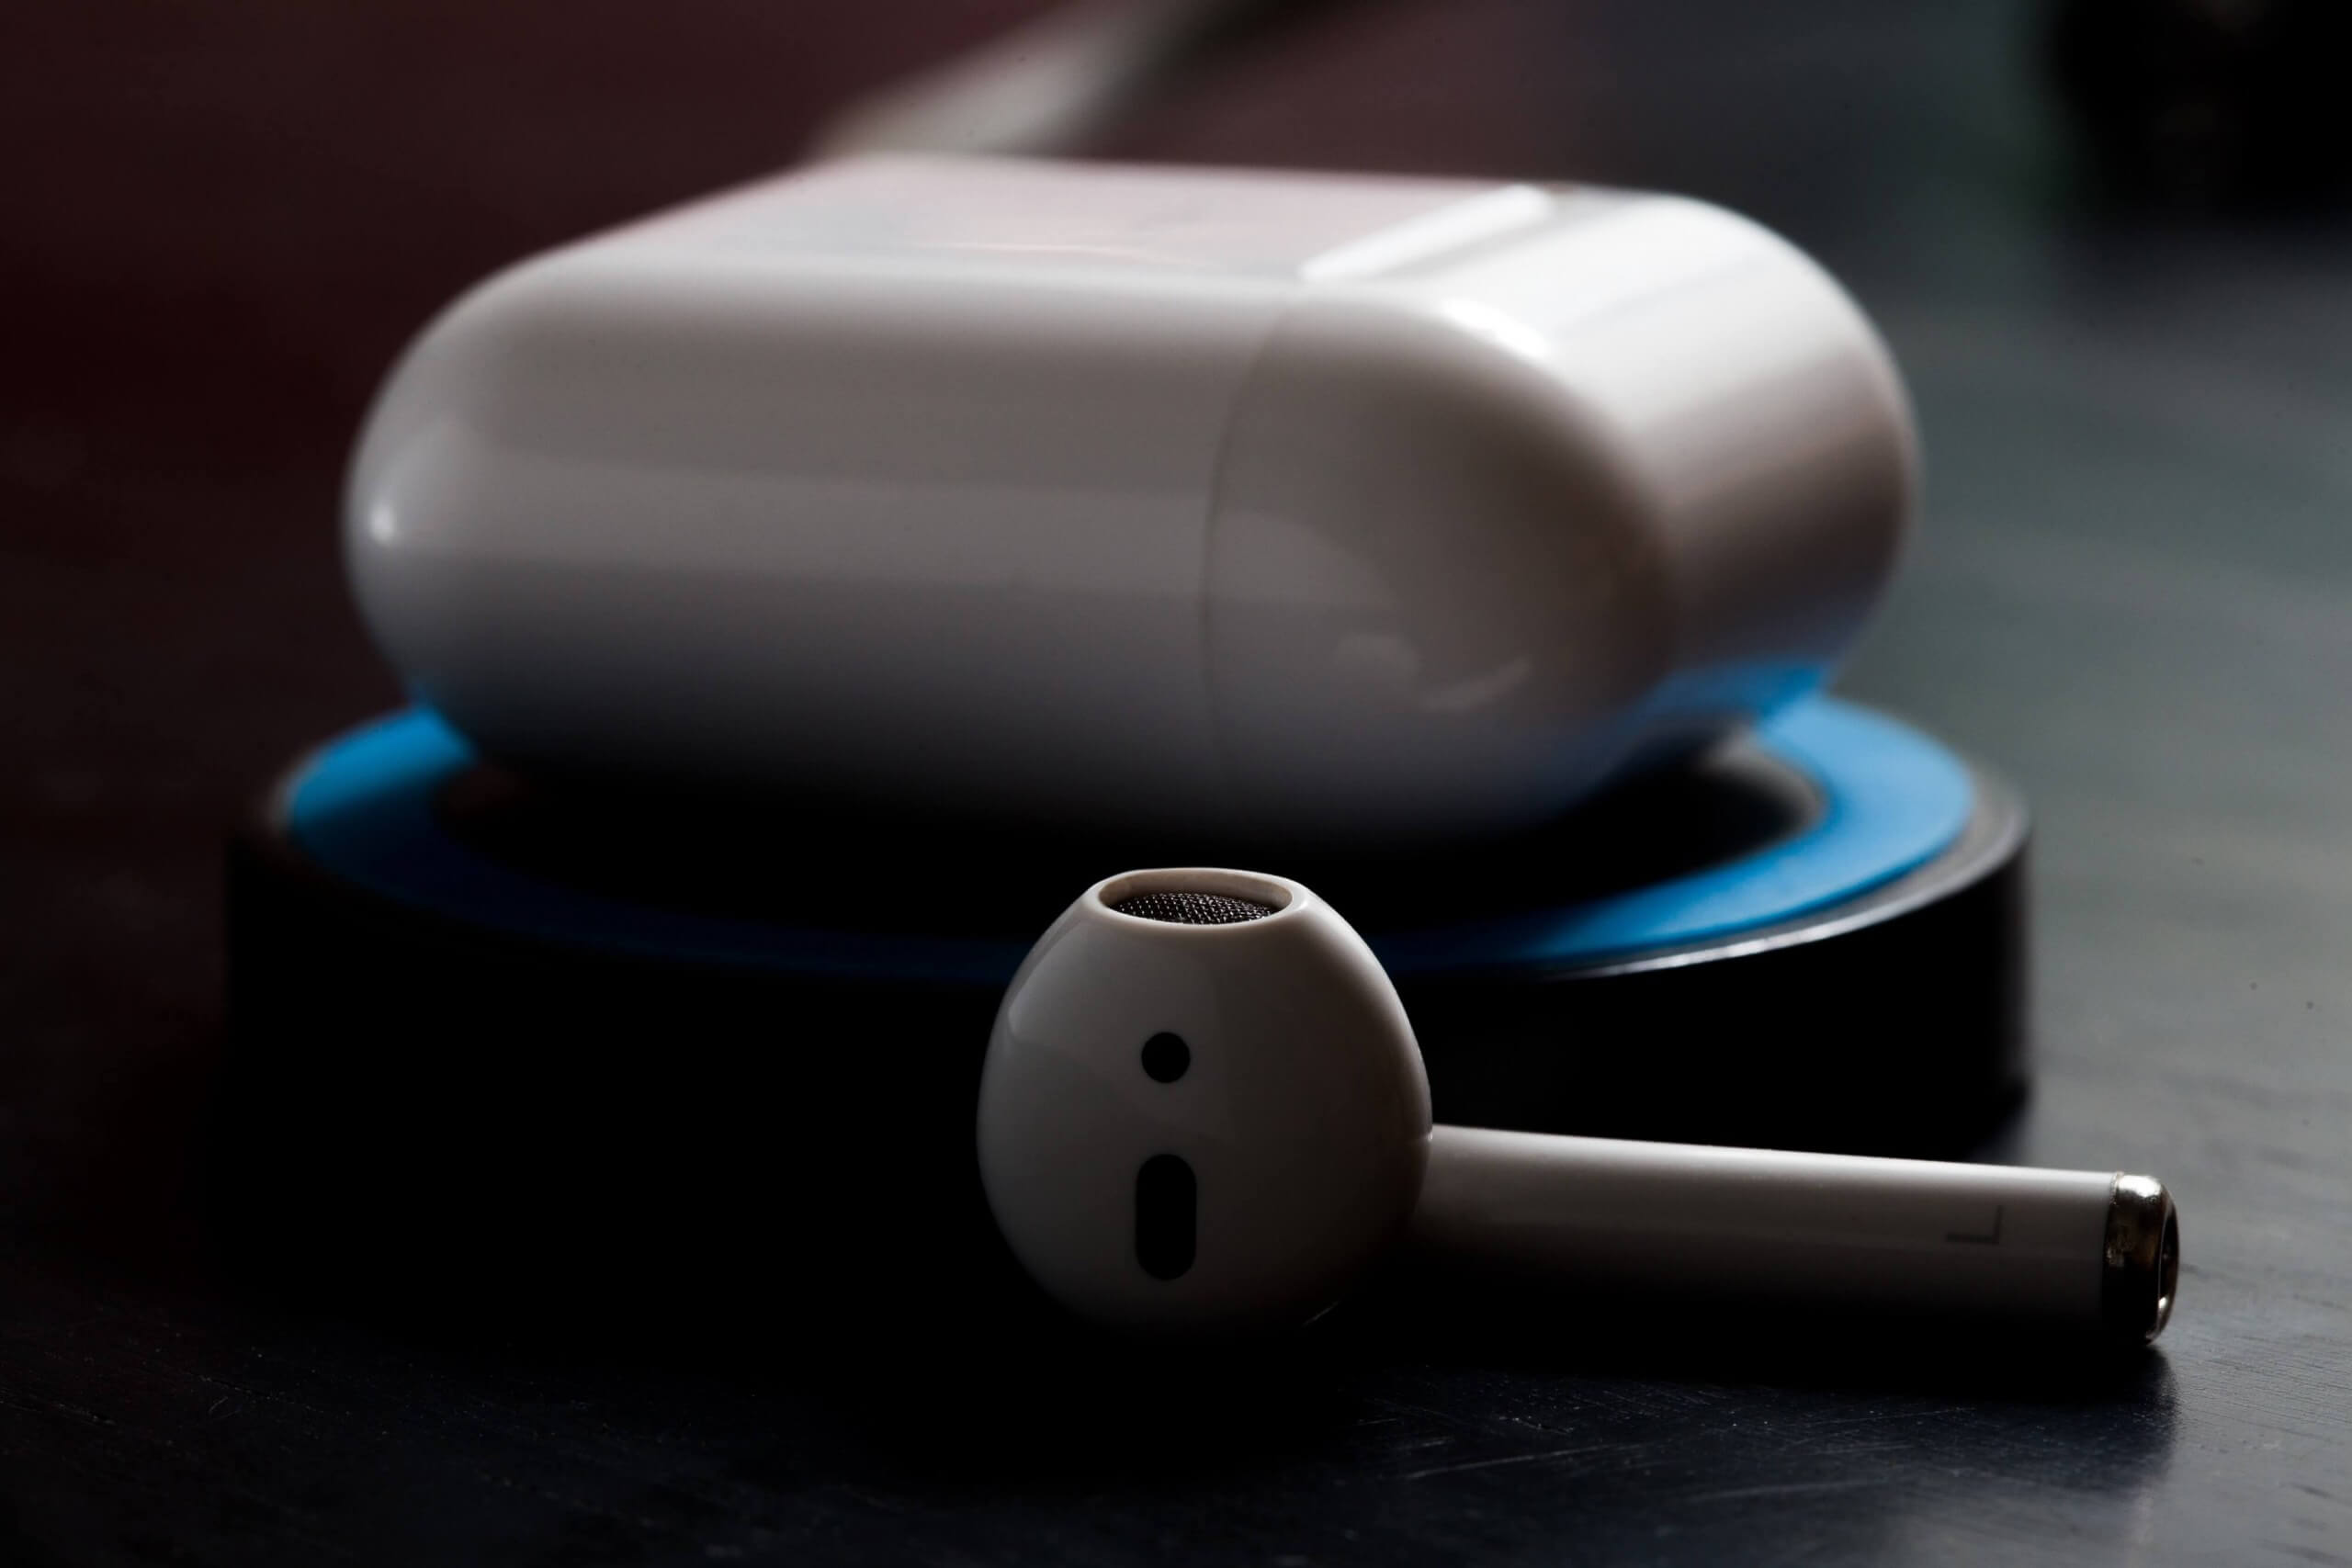 iPhone's 'Optimized Charging' comes to AirPods with iOS 14